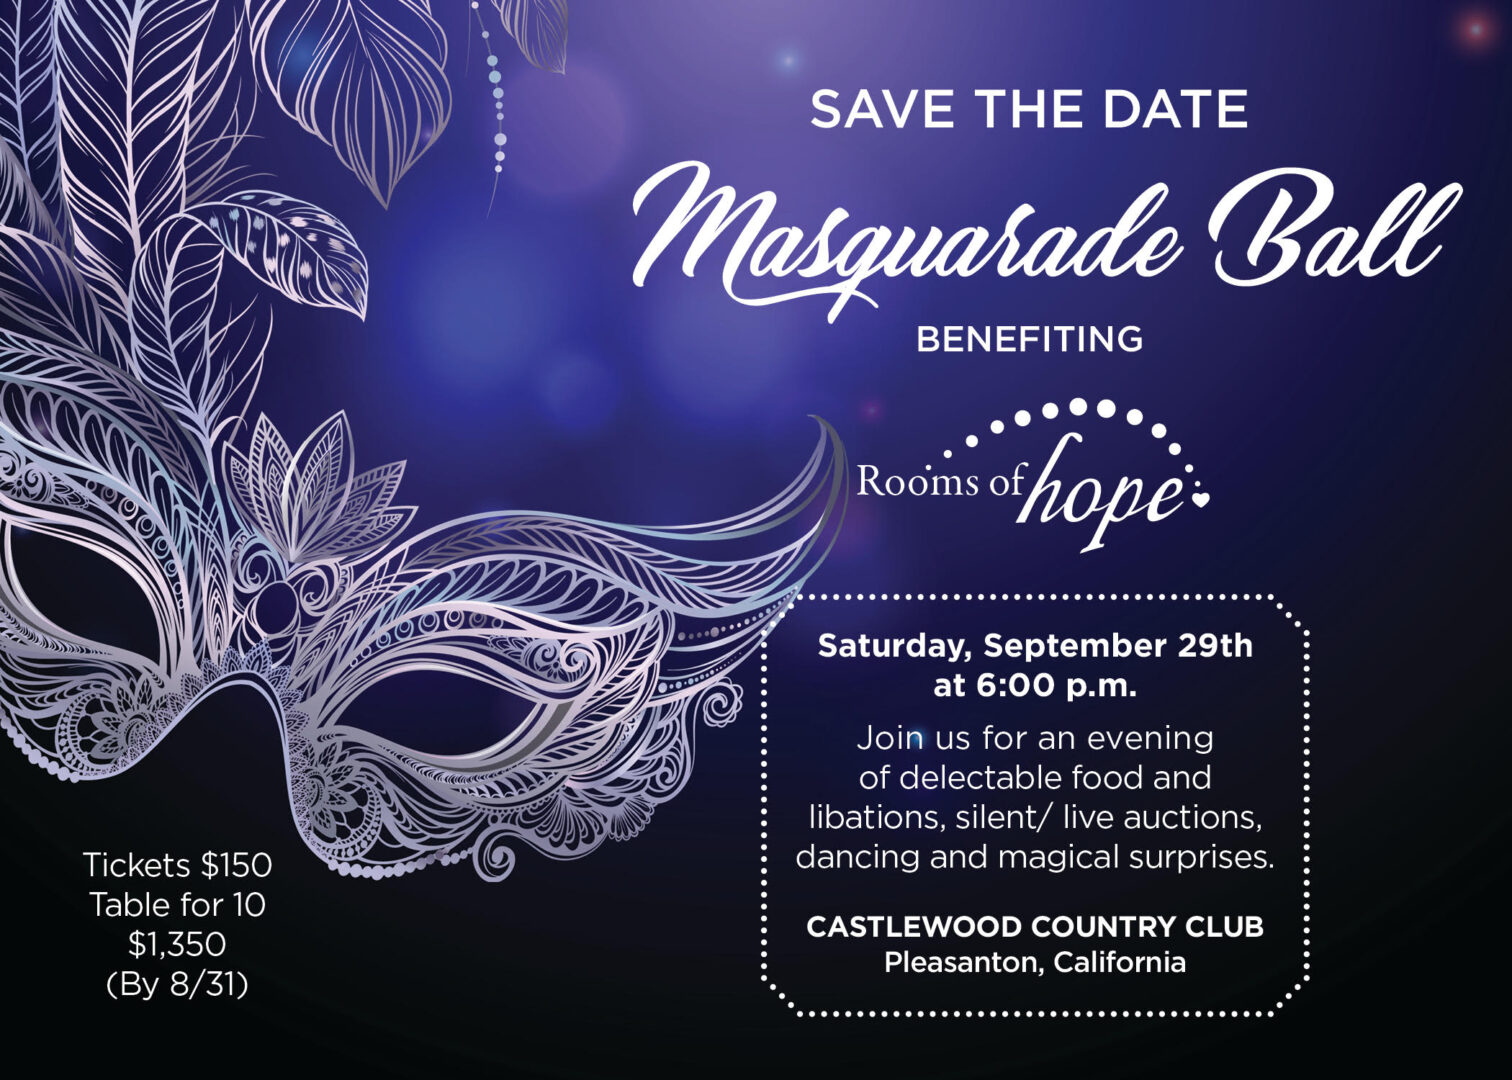 A save the date poster for a masquerade ball